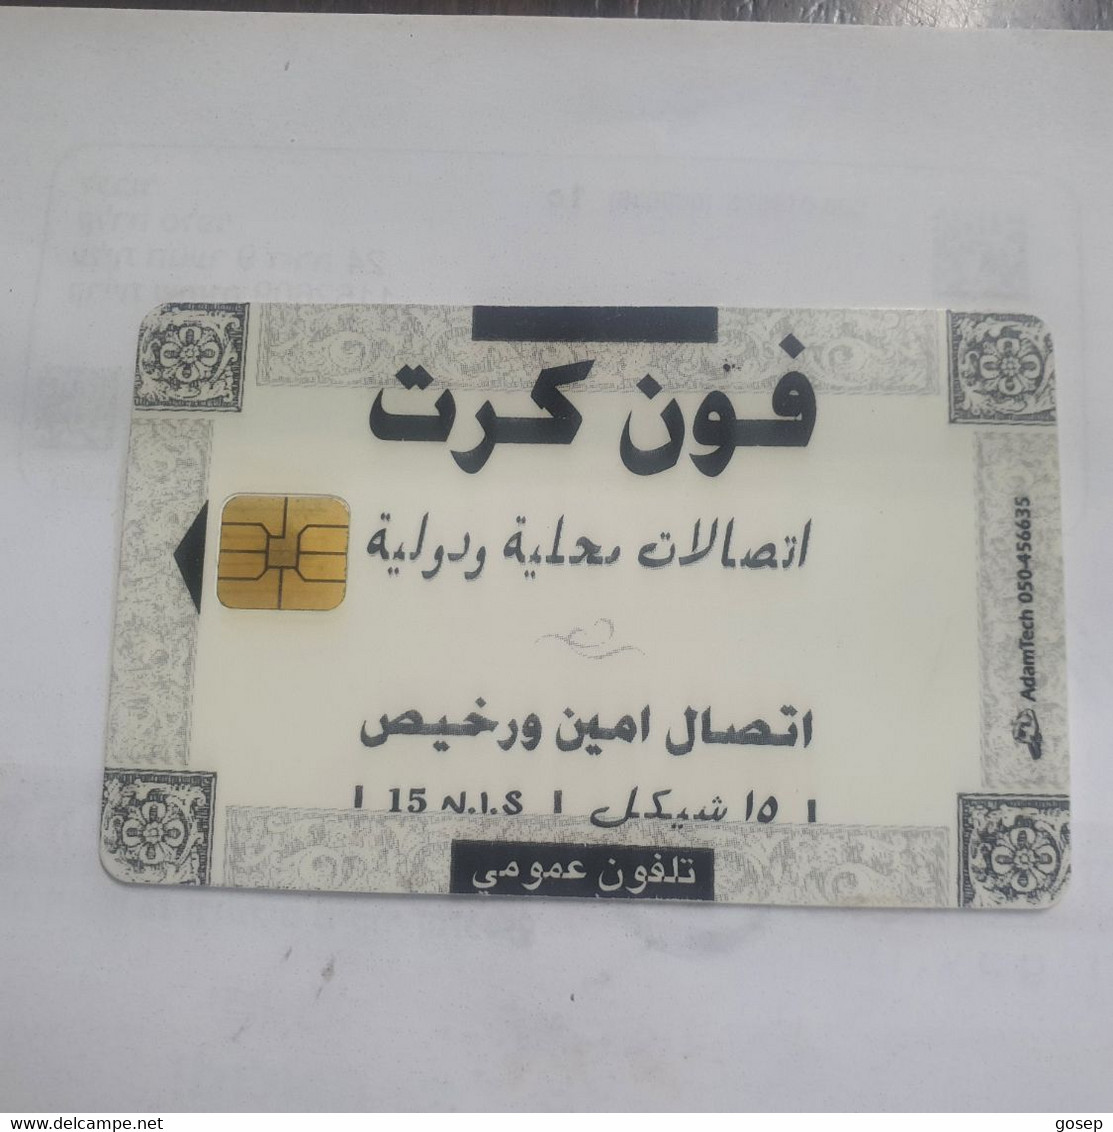 PALESTINE-(PS-SOL-0001)-The Best Price For Personal Communication-(402)-(chip Card)used Card+1prepiad Free - Palestine